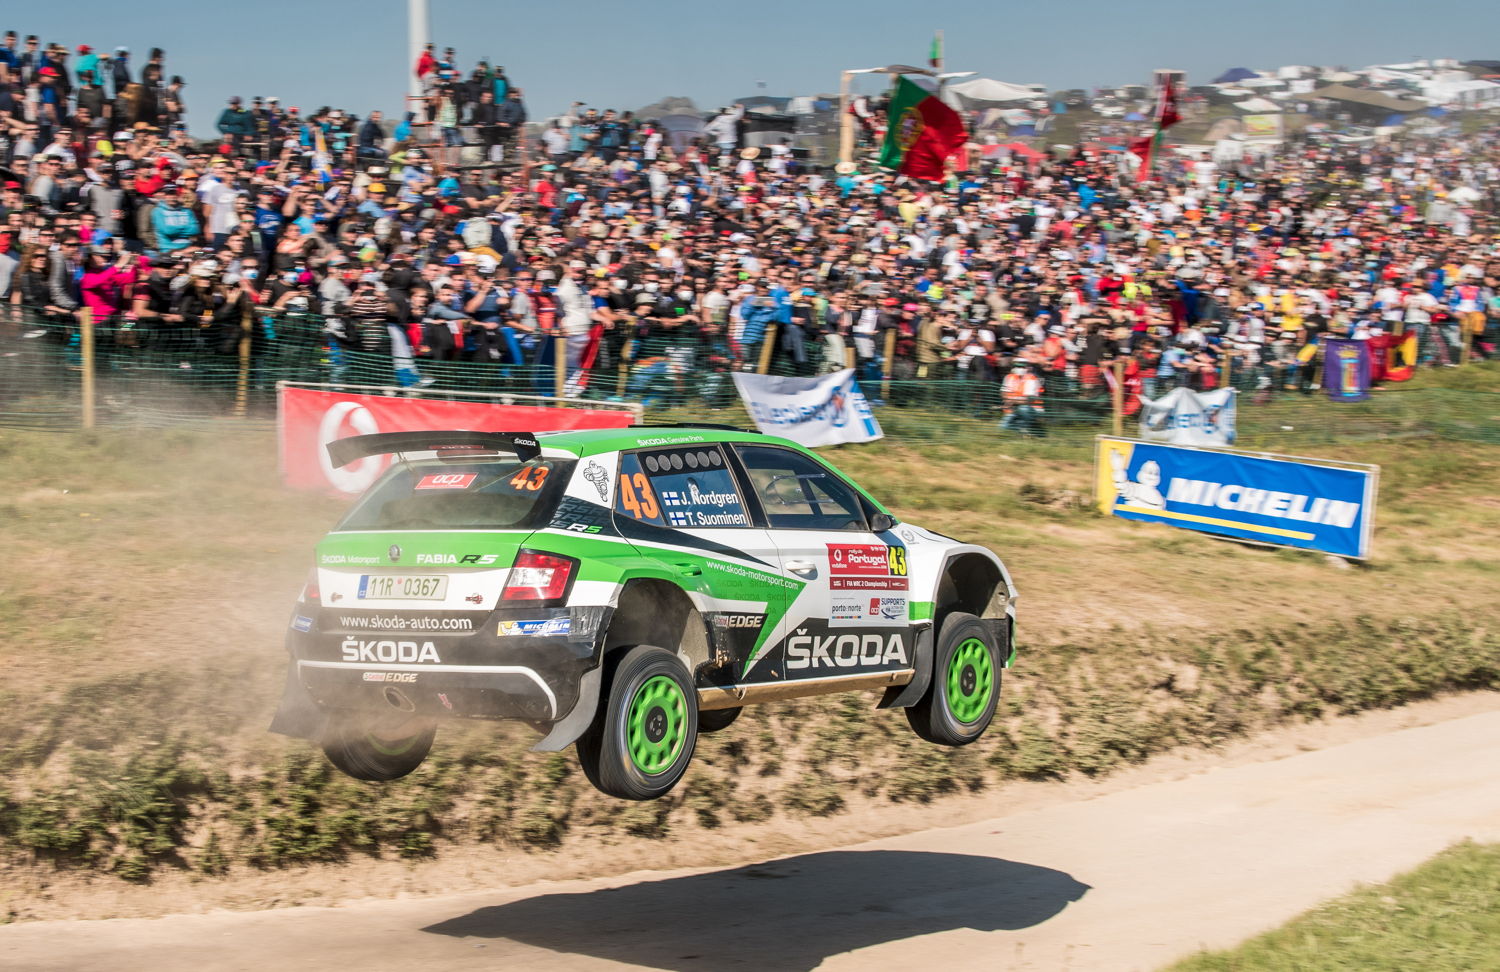 At their Rally Portugal premiere Finnish ŠKODA juniors
Juuso Nordgren and Tapio Suominen were delayed by
punctures, but finished a credible sixth